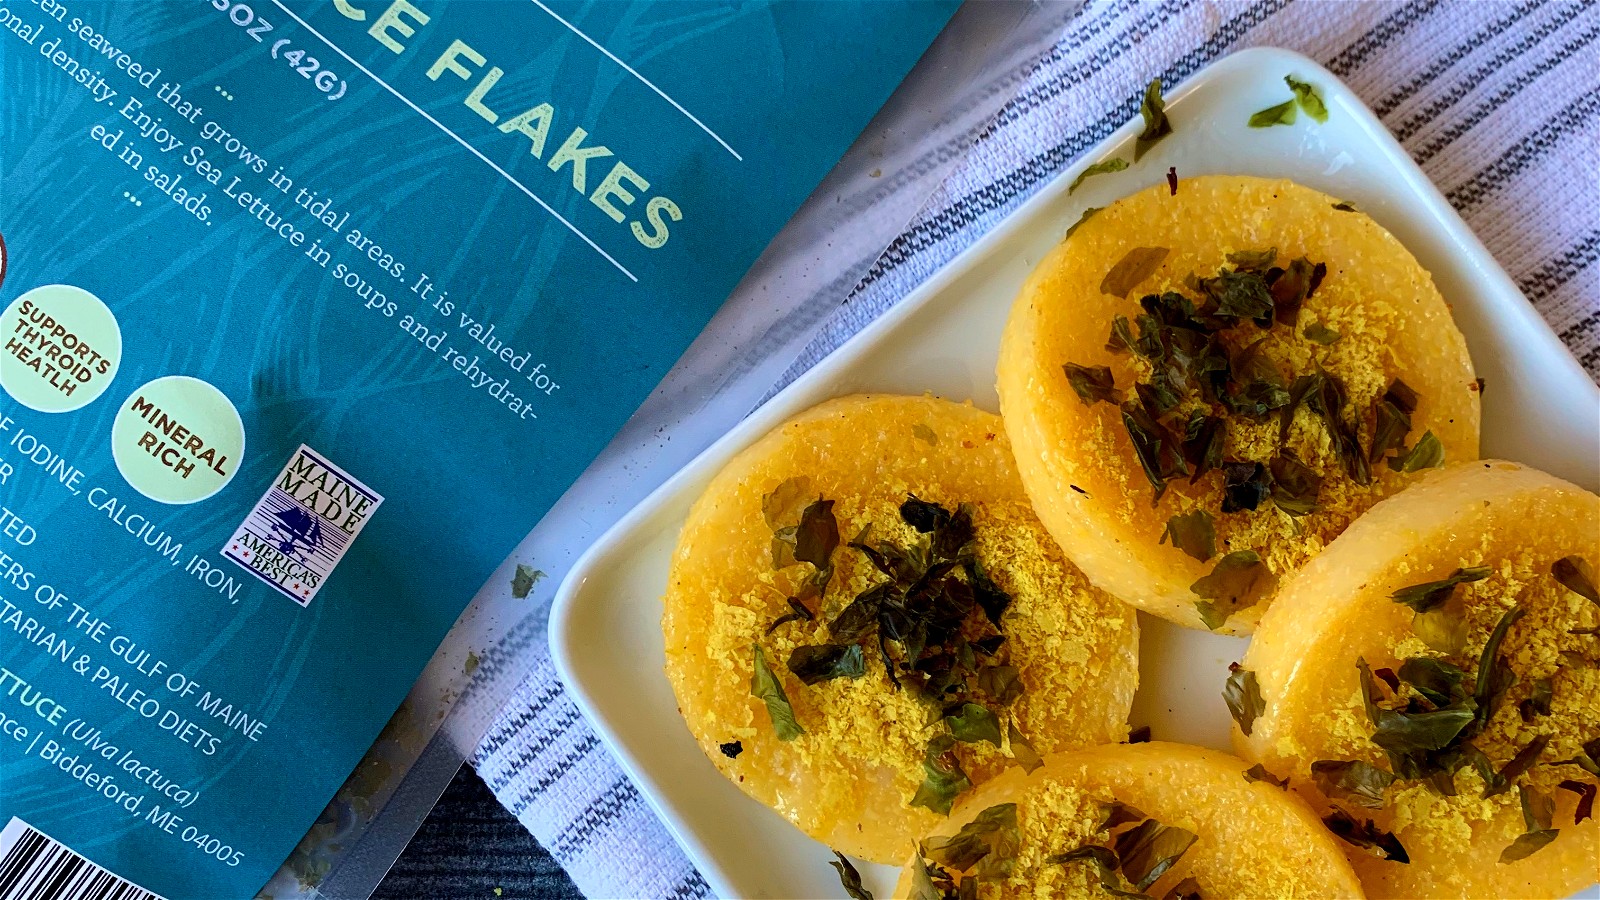 Image of Polenta Rounds Topped with Nutritional Yeast & Sea Lettuce Flakes